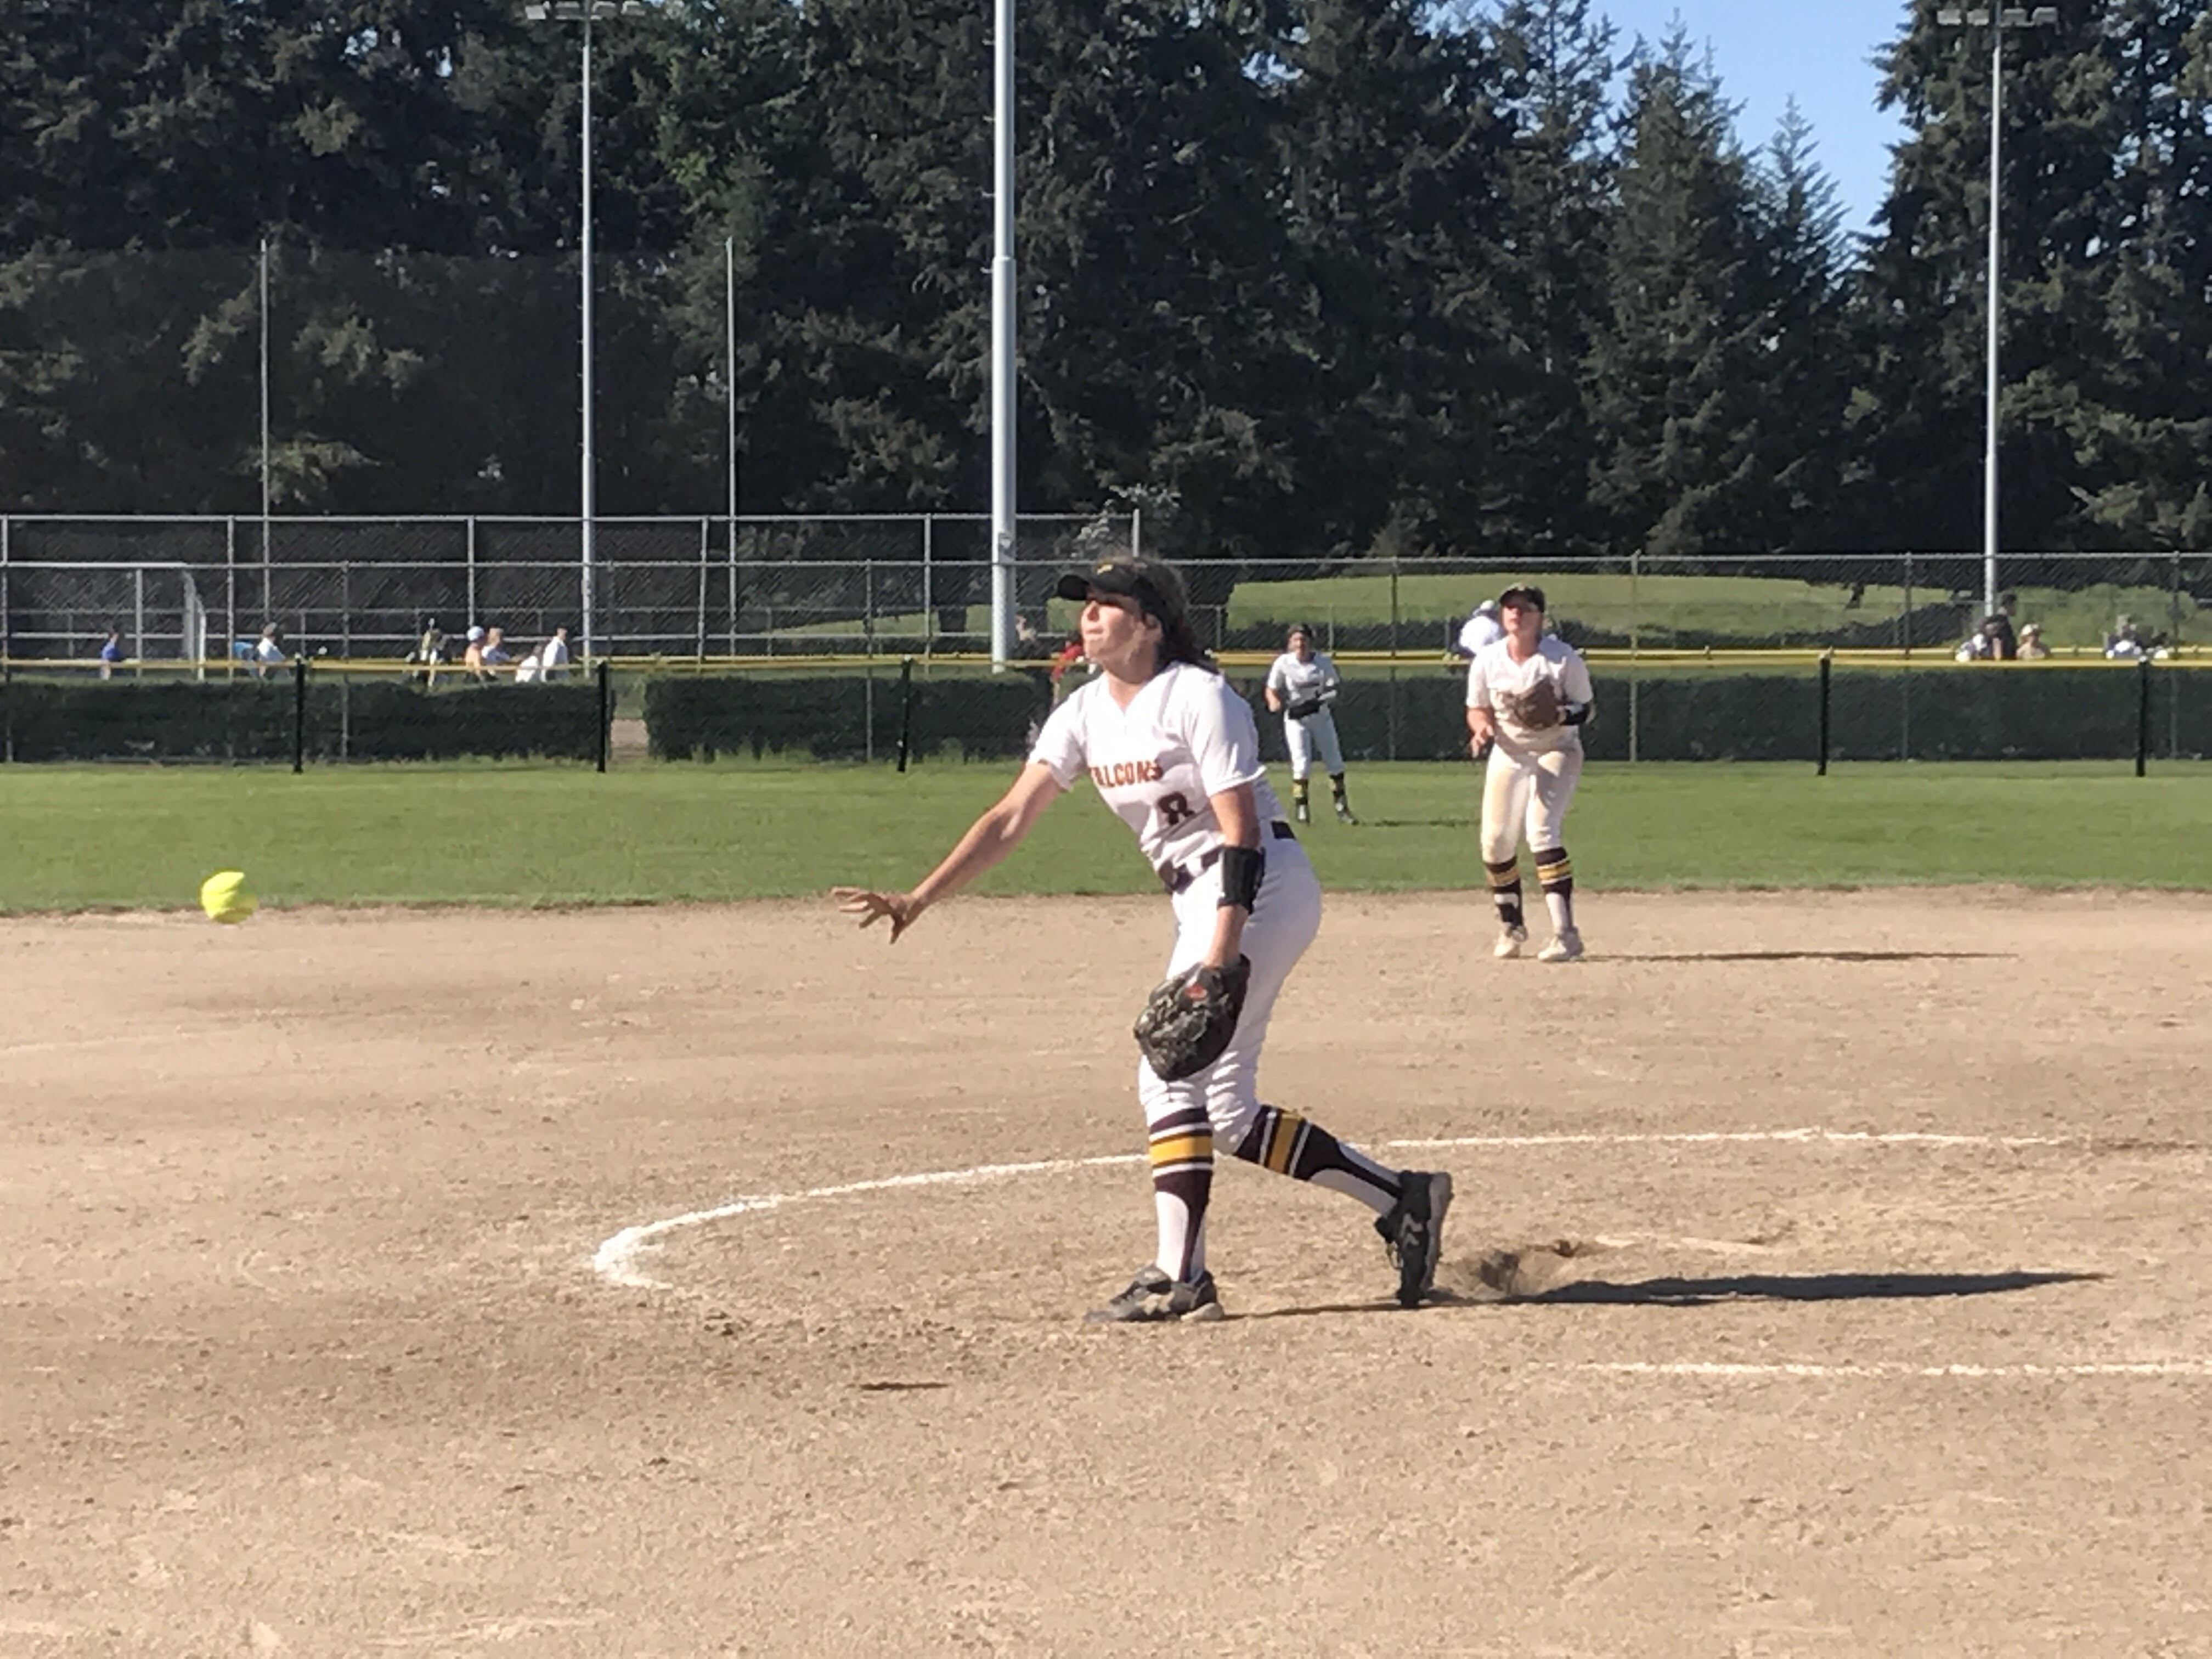 Prairie pitcher Olivia Meyers struck out three and didn't allow a hit in 3 1/3 innings of relief against Gig Harbor in Saturday's 3A bi-district softball game in Spanaway. The Falcons lost 4-1 in the winner-to-state game.